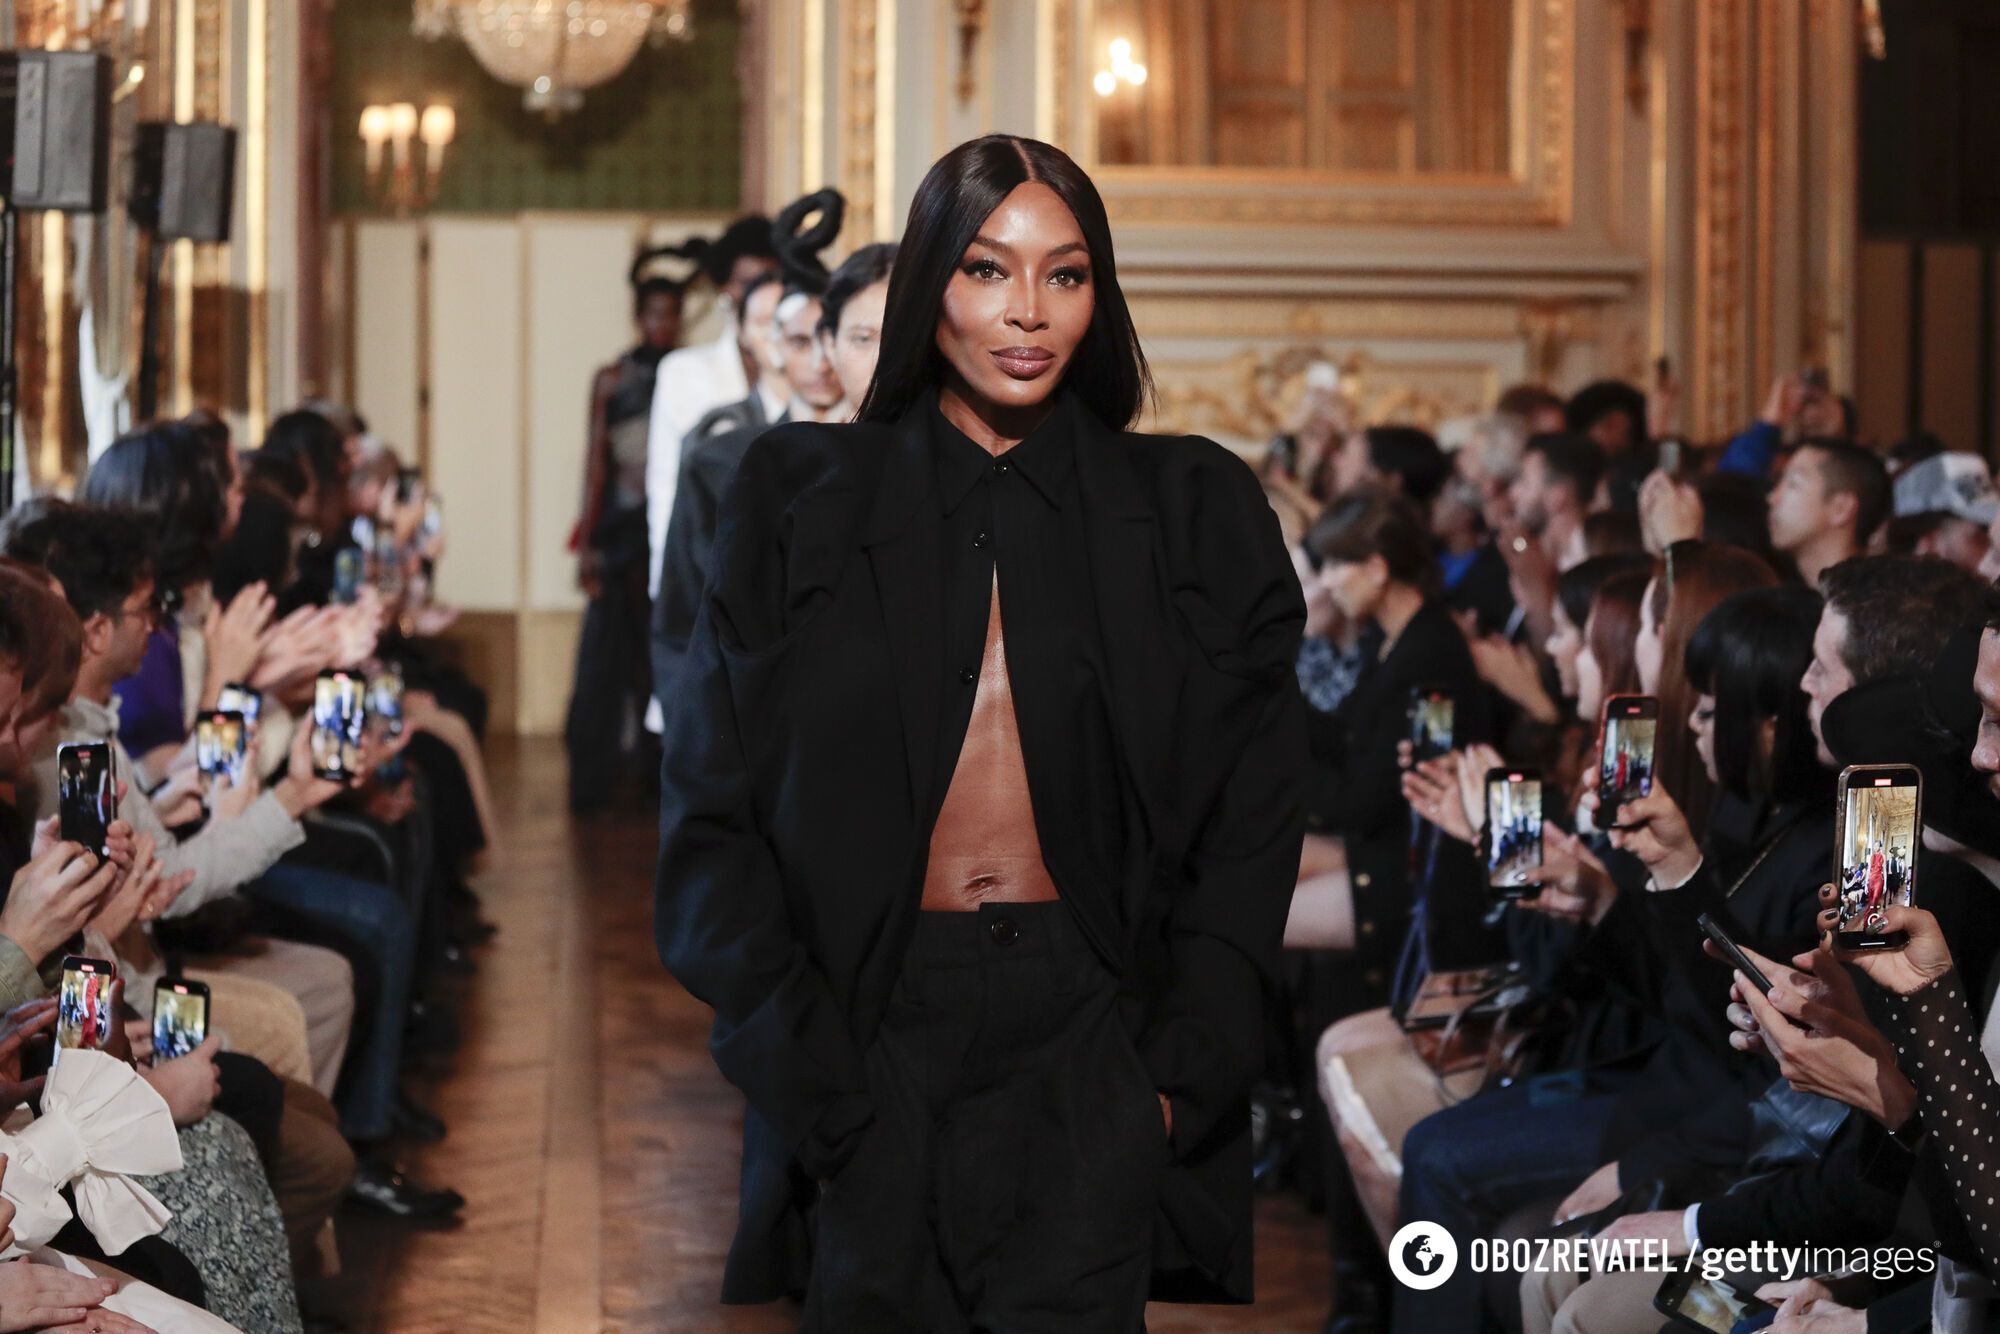 Naomi Campbell almost showed too much at Paris Fashion Week without a bra